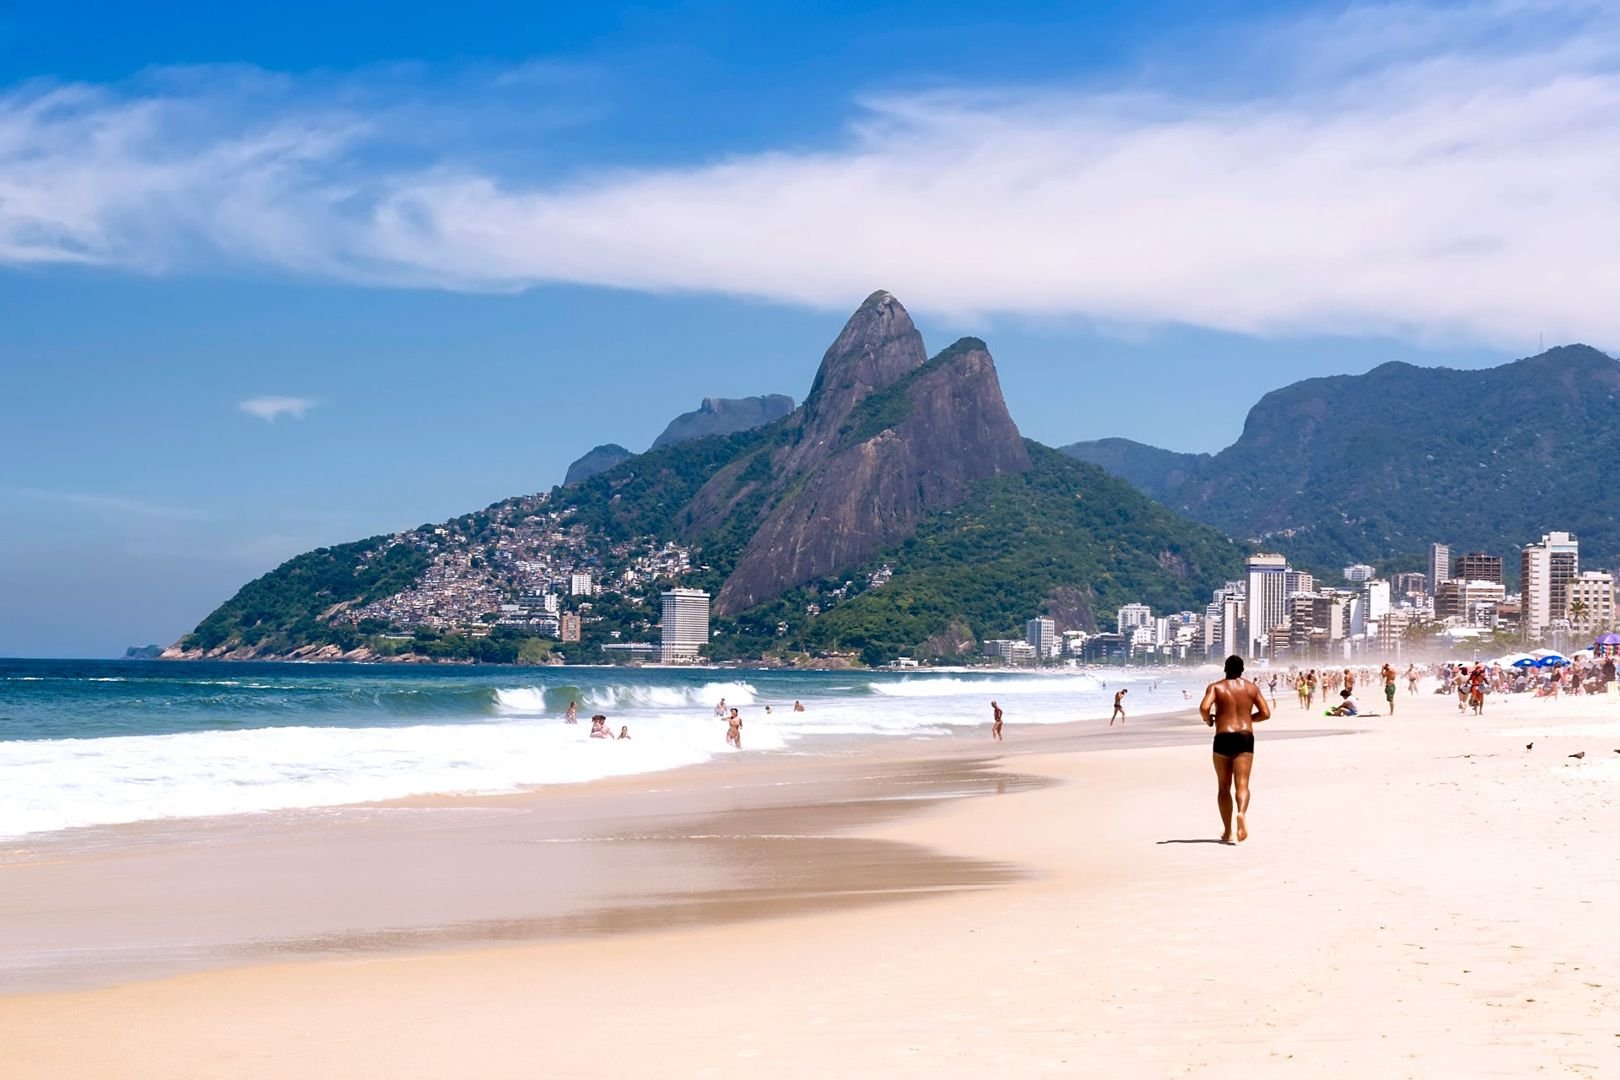 Discover the famous Ipanema Beach, one of the most beautiful beaches in